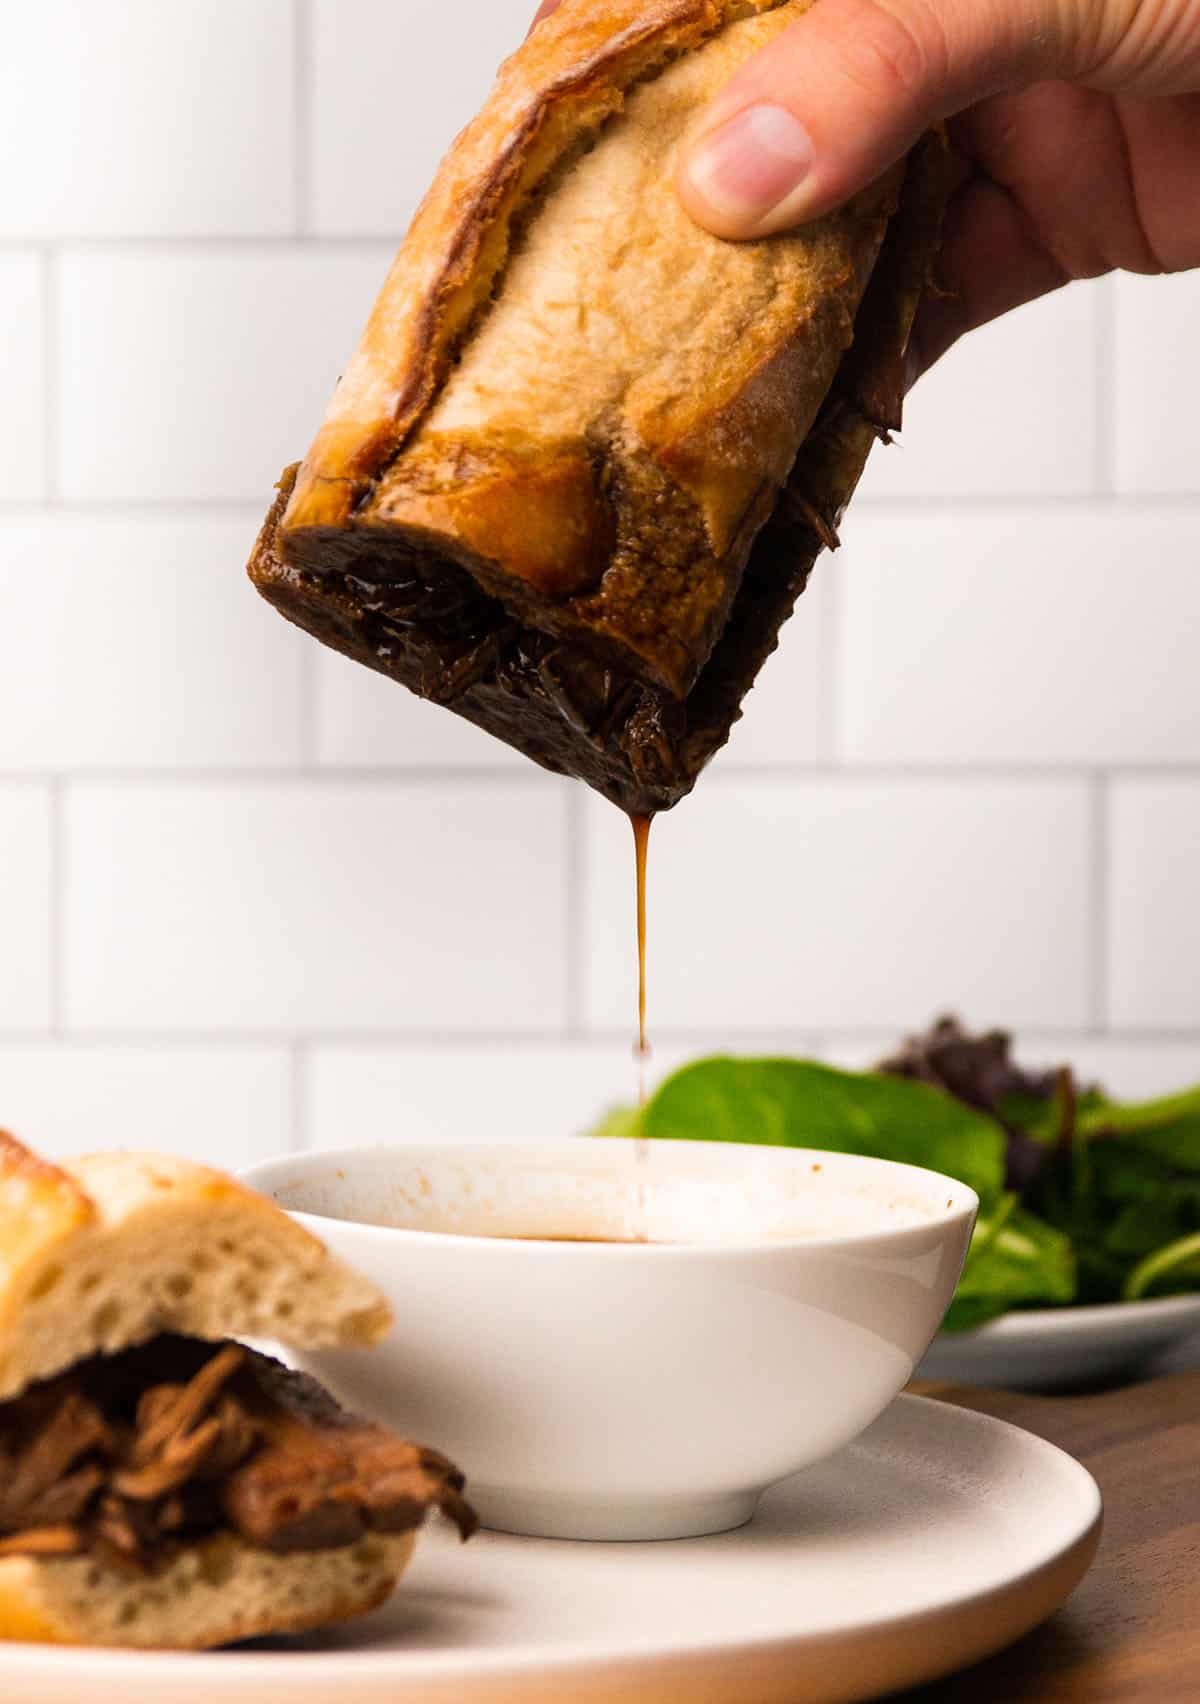 Dipping a french dip into a bowl of au jus.